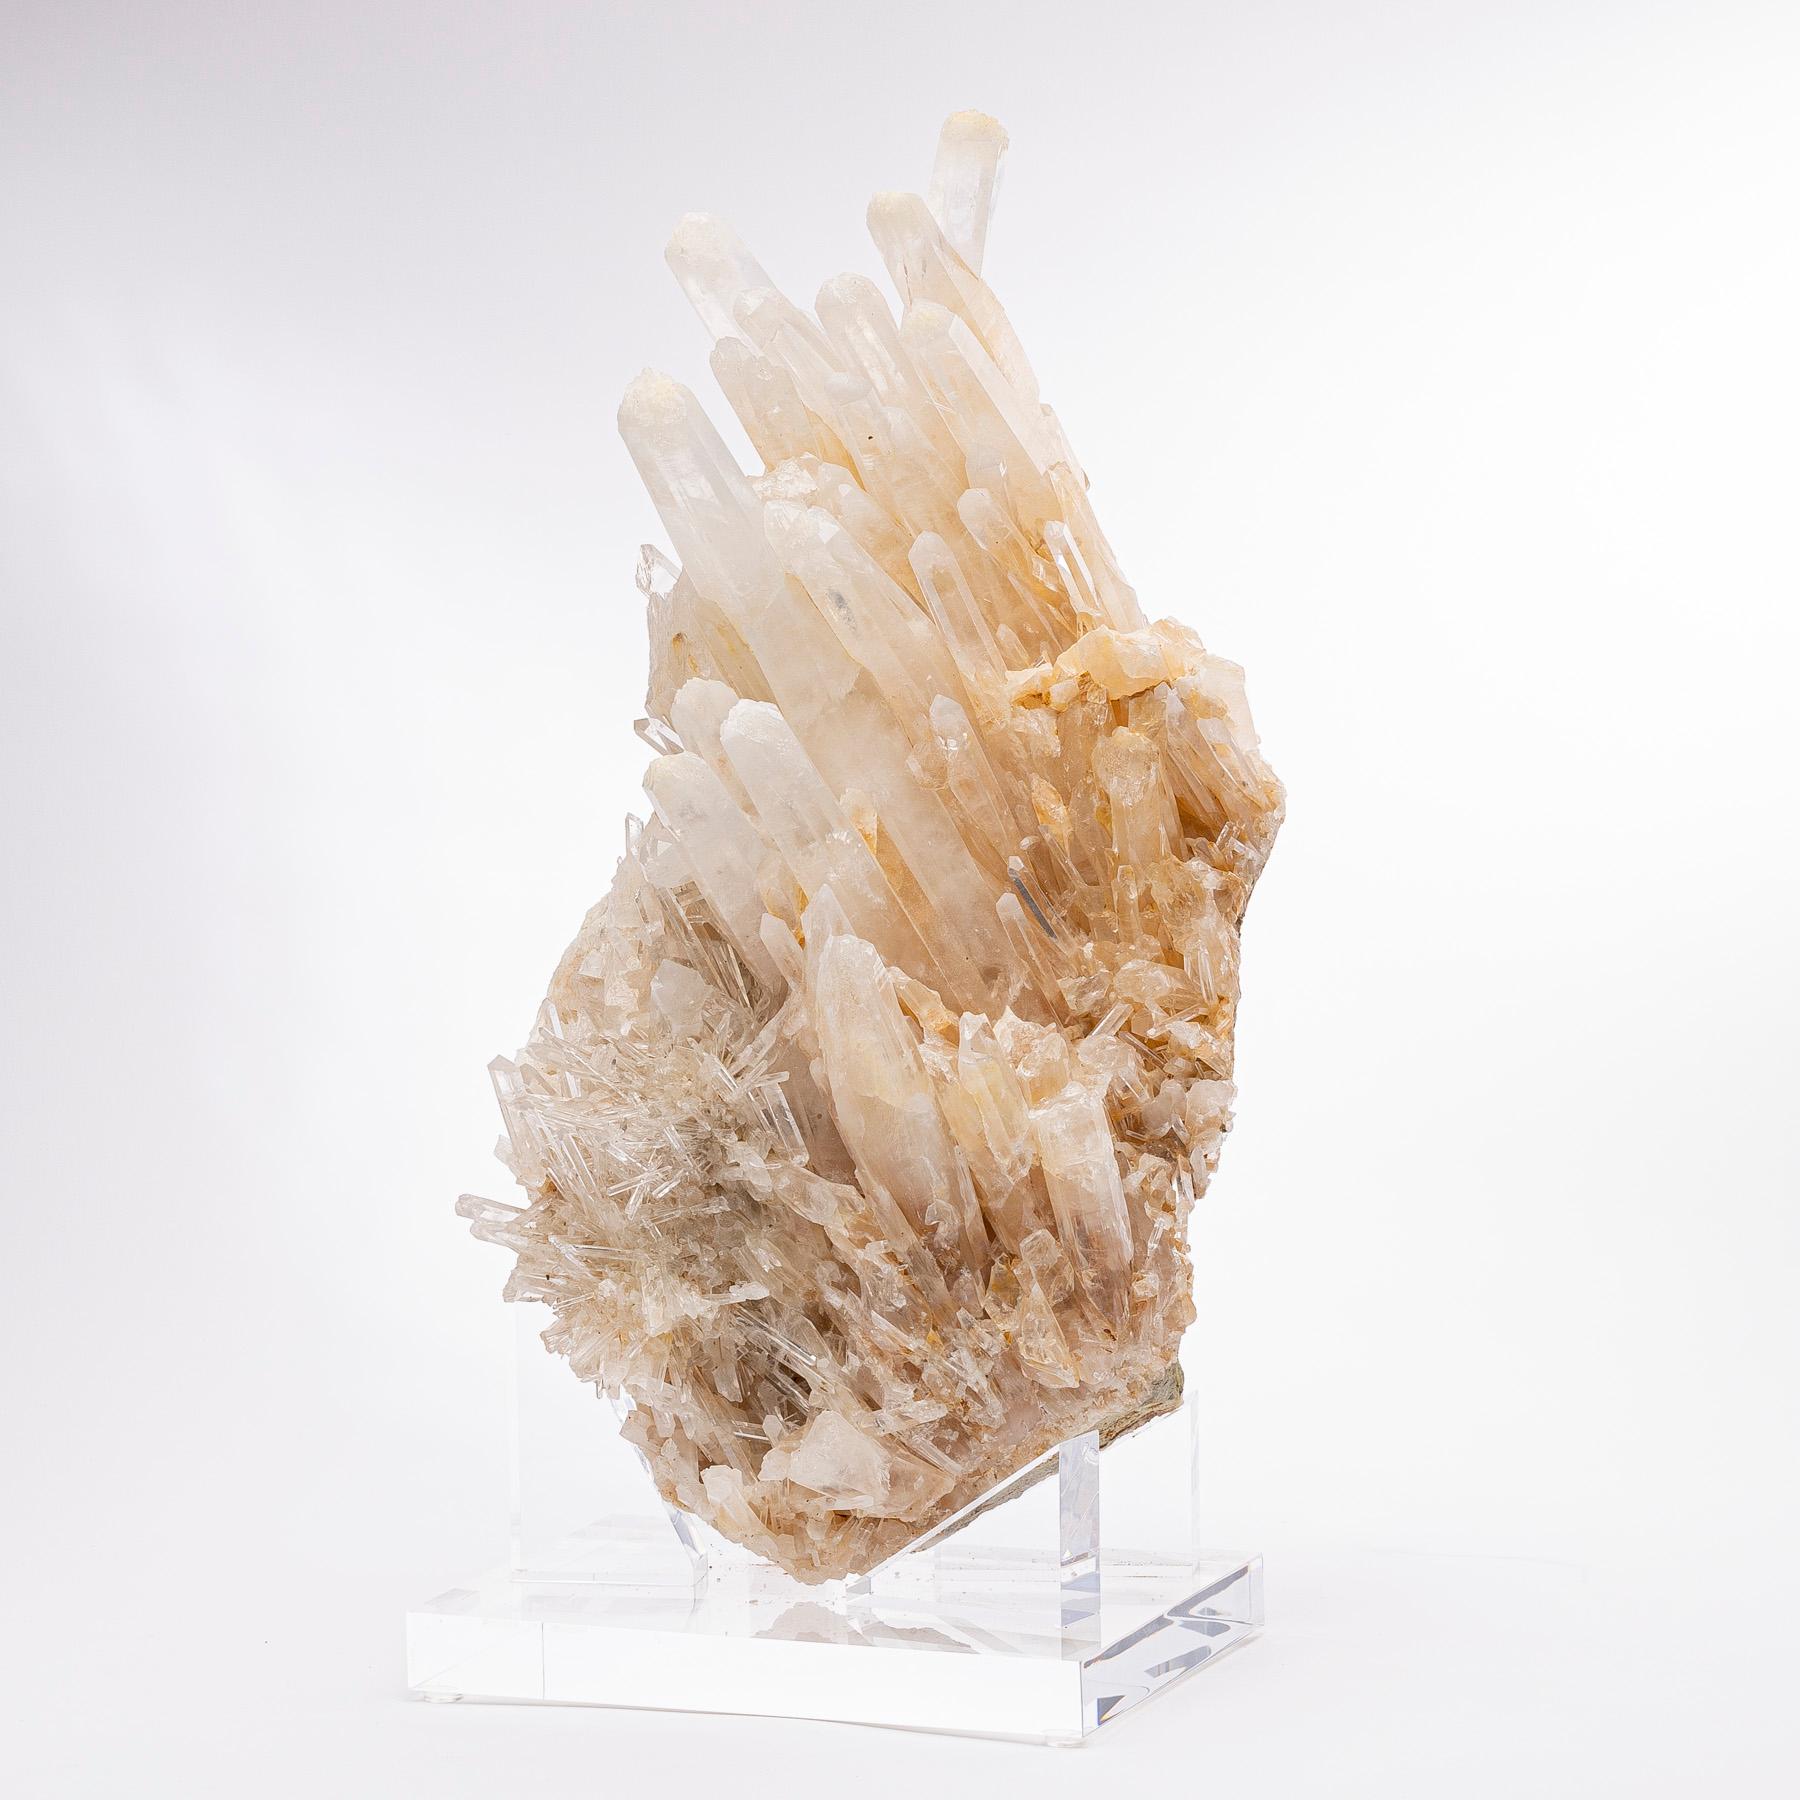 All natural Colombian quartz specimen mounted on acrylic base.